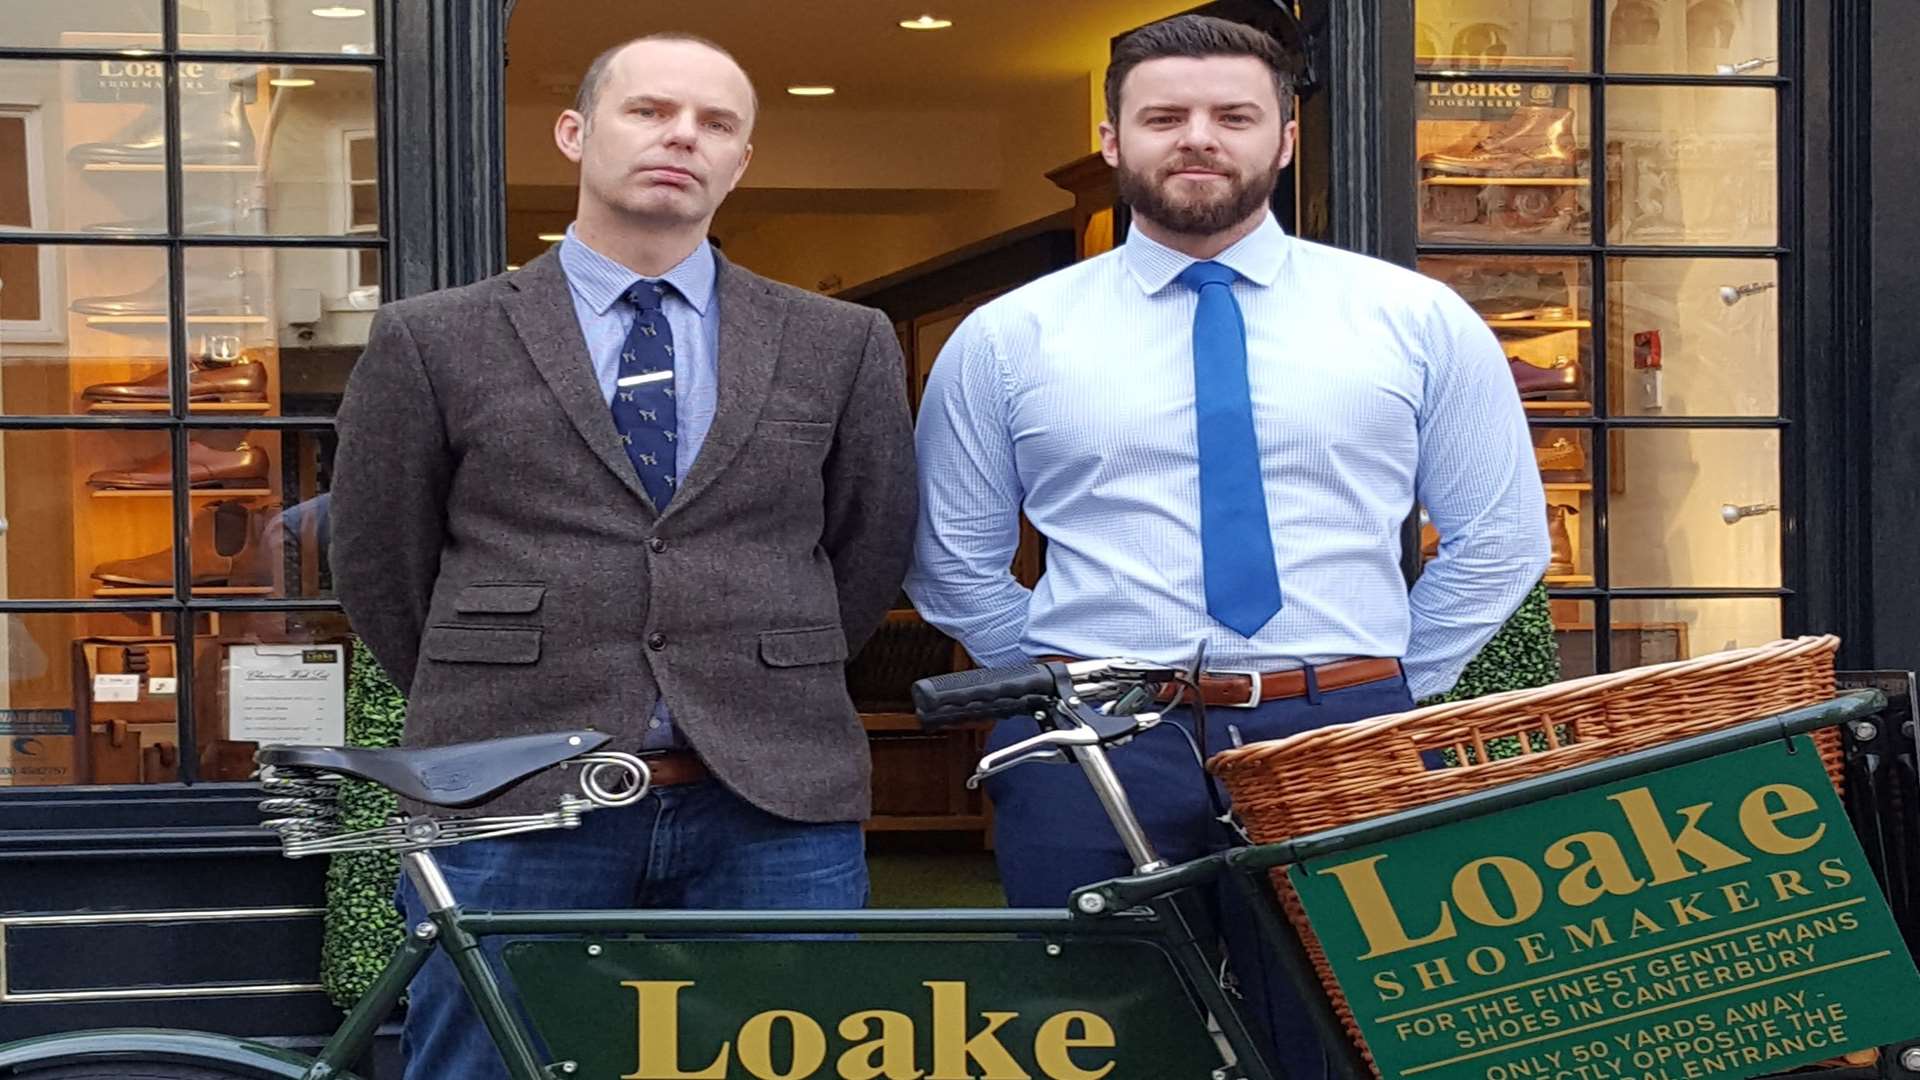 Business manager Mark Pegg (left) and sales director Keiron Macnamara with the Loake bike